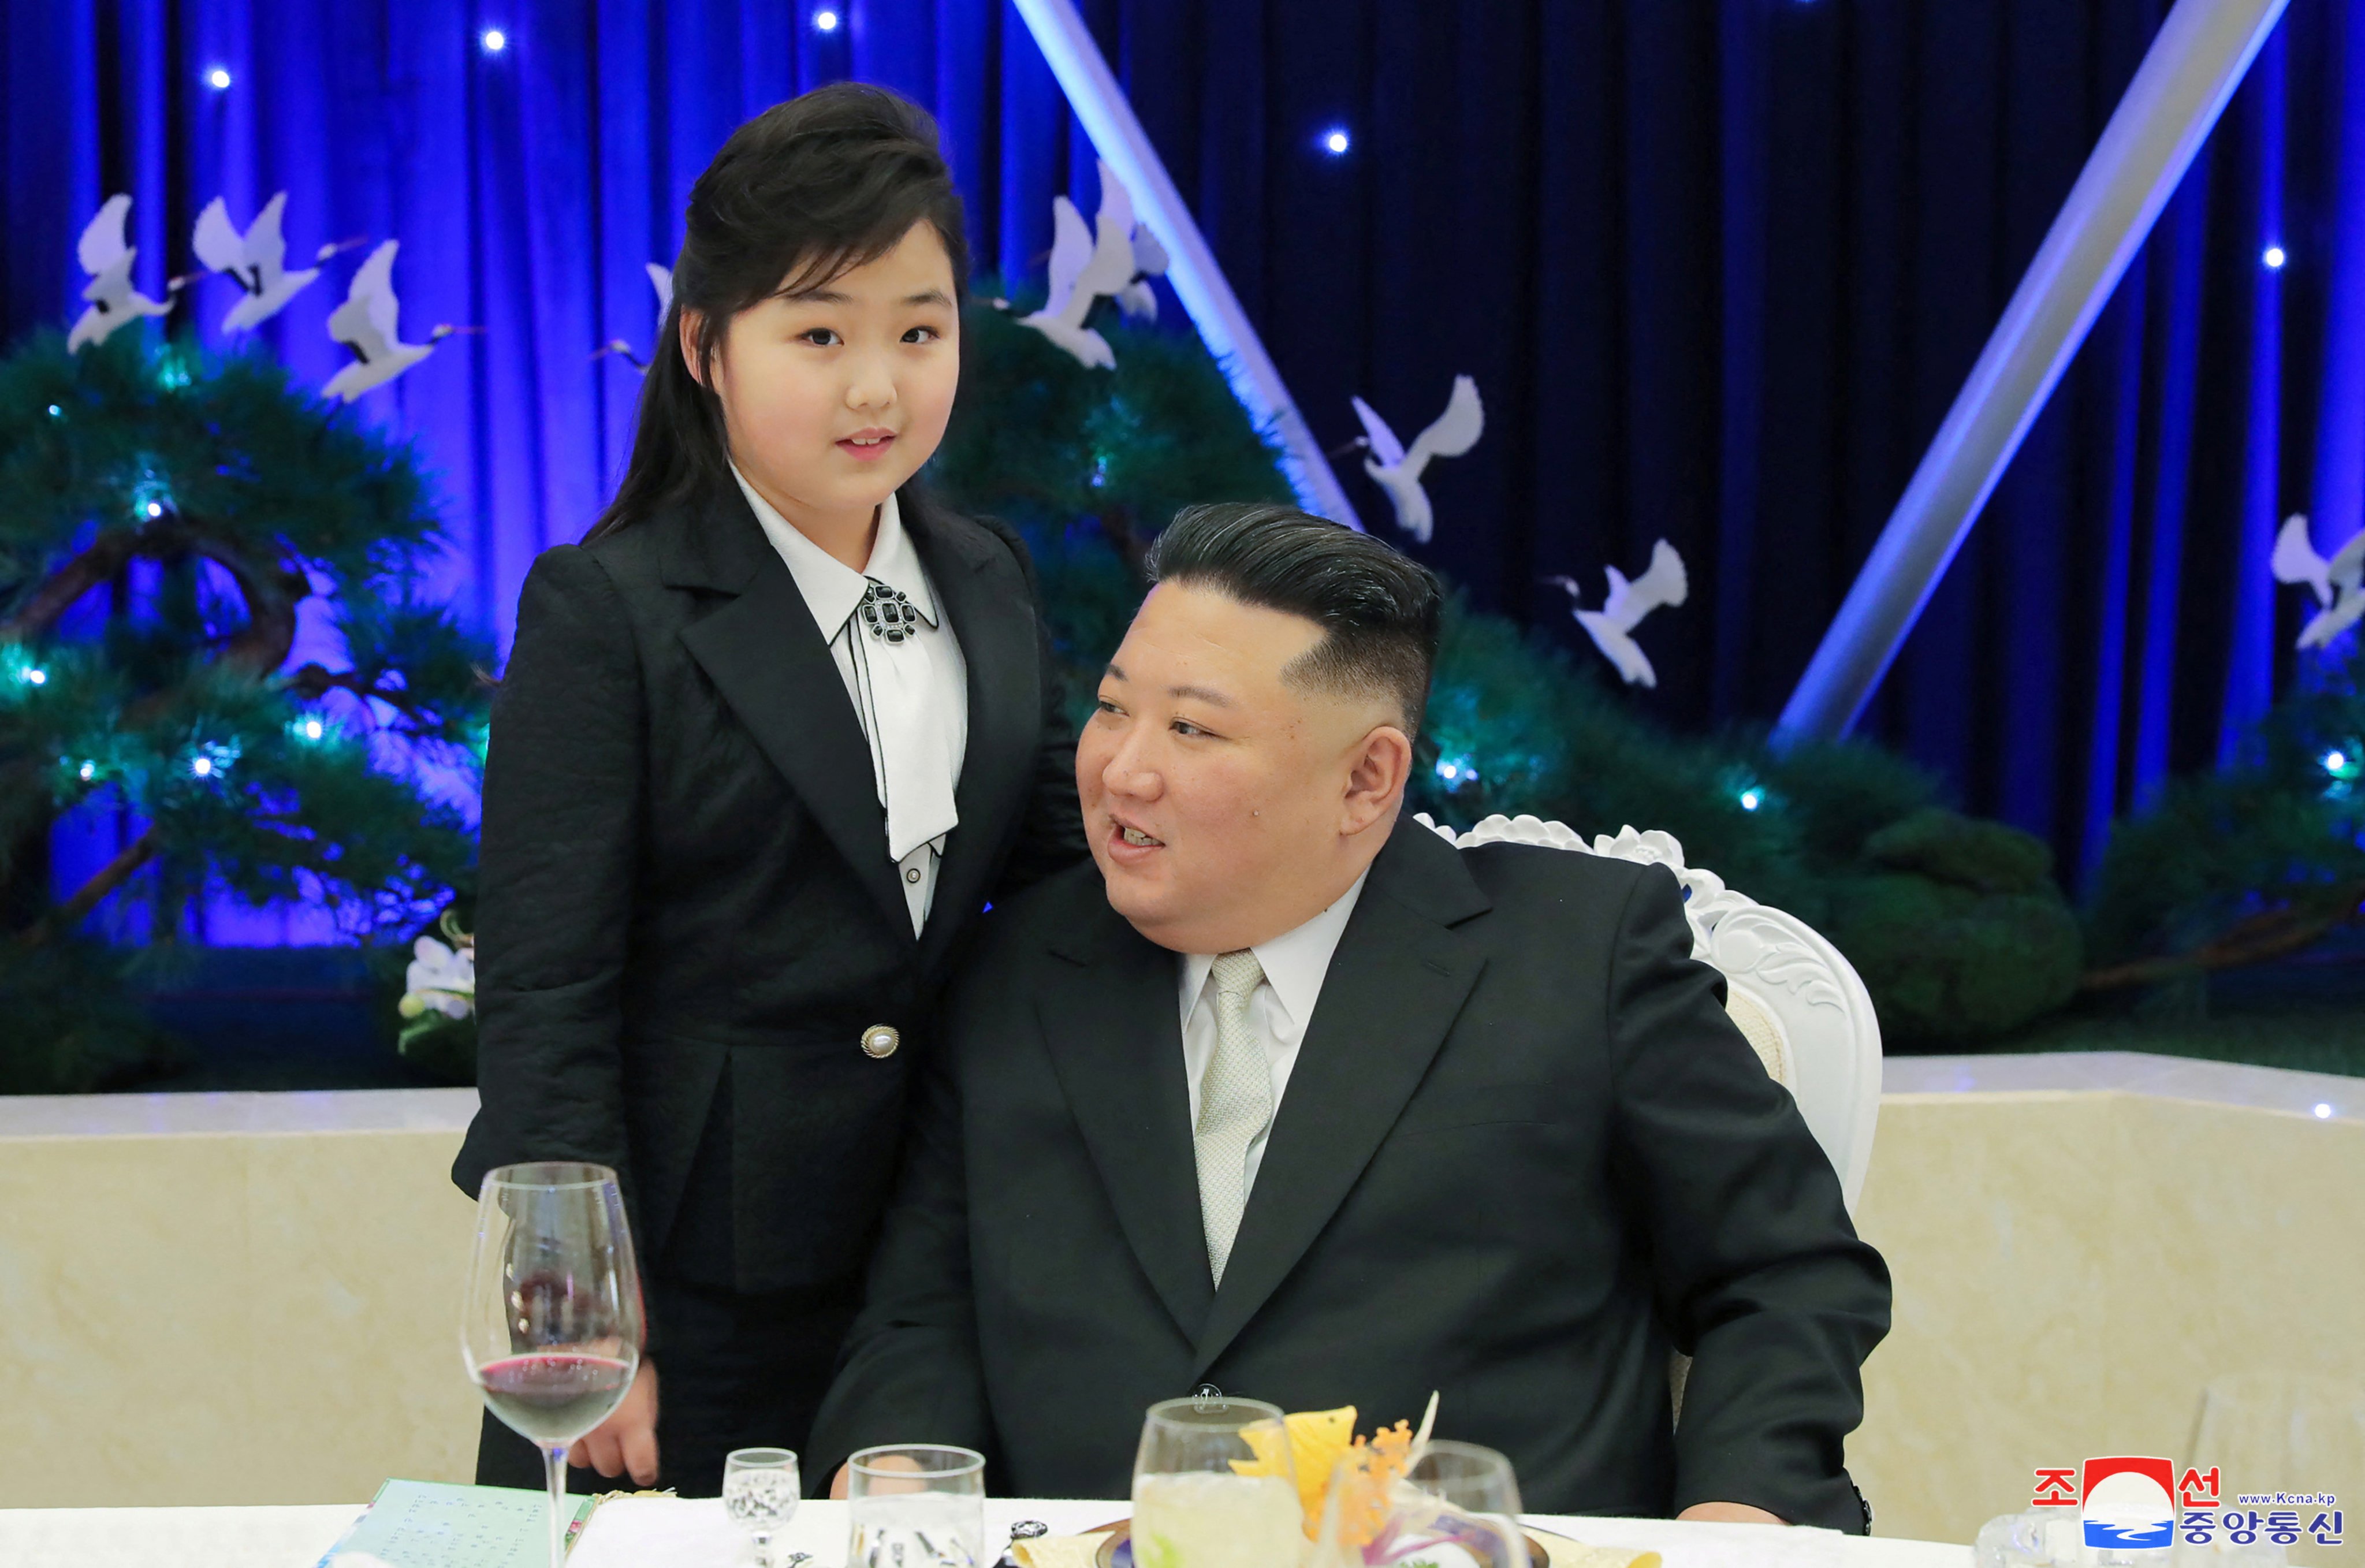 North Korean leader Kim Jong-un is making people with the same name as his daughter Ju-ae (left) to change theirs, as Chinese emperors once did. Chinese culture still has taboo words, but their use isn’t outlawed. Photo: Reuters